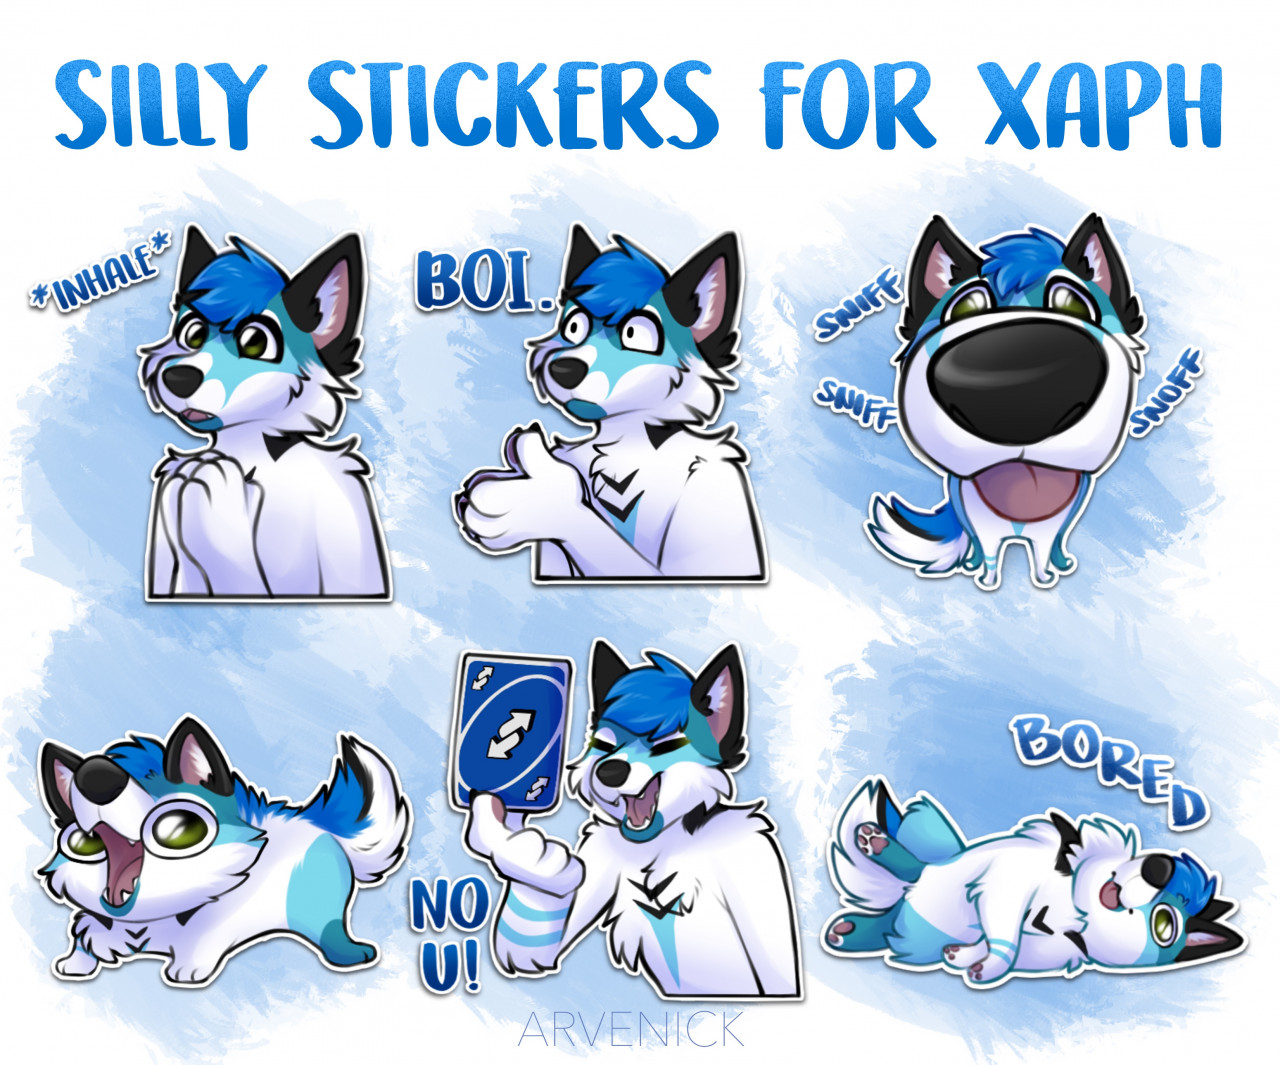 Silly stickies for Xaph! (YCH) by arvenick on DeviantArt